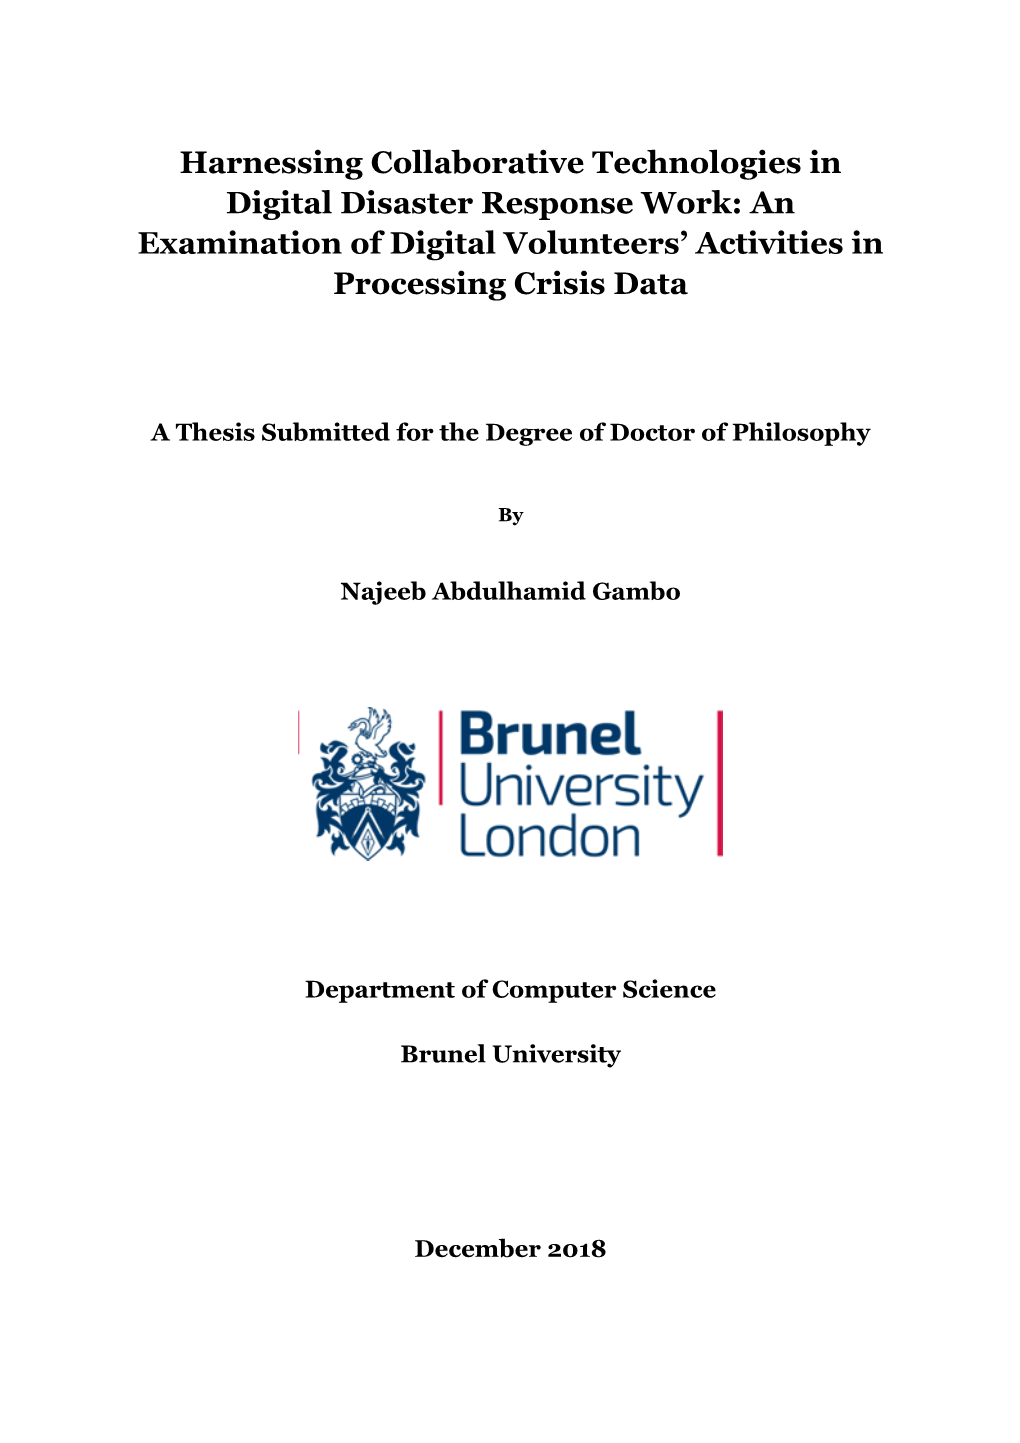 Harnessing Collaborative Technologies in Digital Disaster Response Work: an Examination of Digital Volunteers’ Activities in Processing Crisis Data